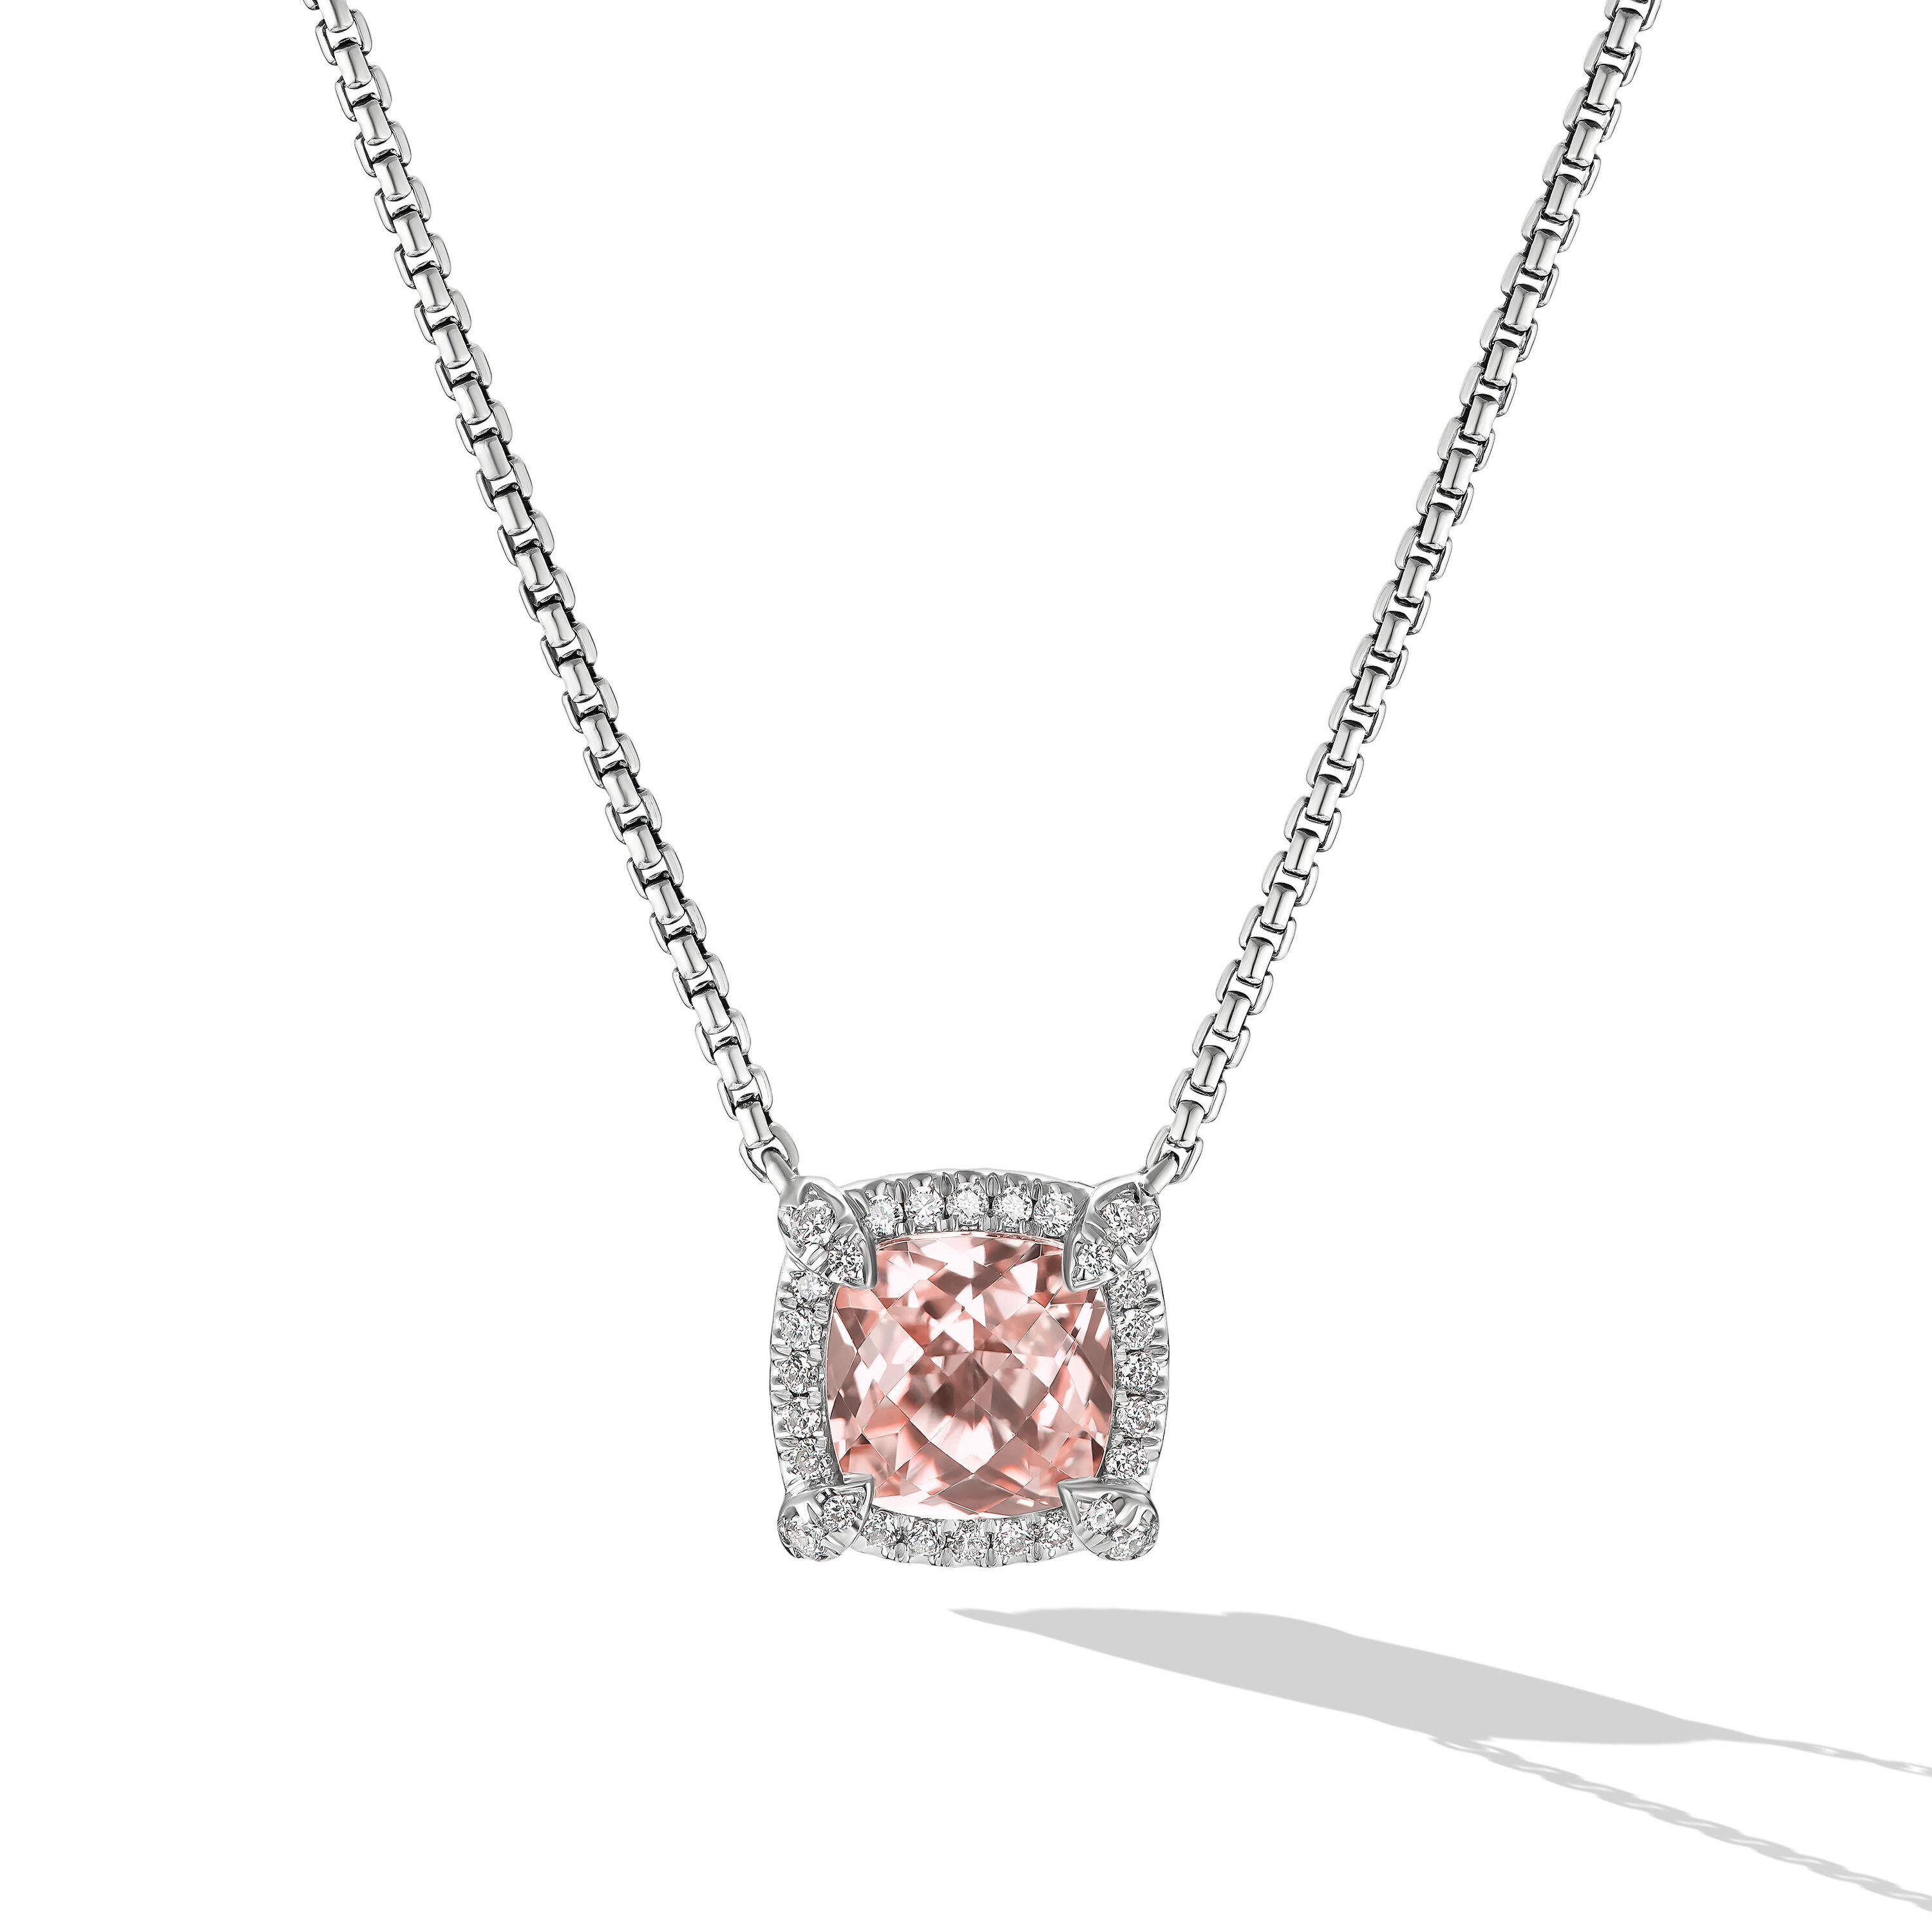 David Yurman Petite Chatelaine Pave Bezel Pendant Necklace in Sterling Silver with Morganite and Diamonds 0